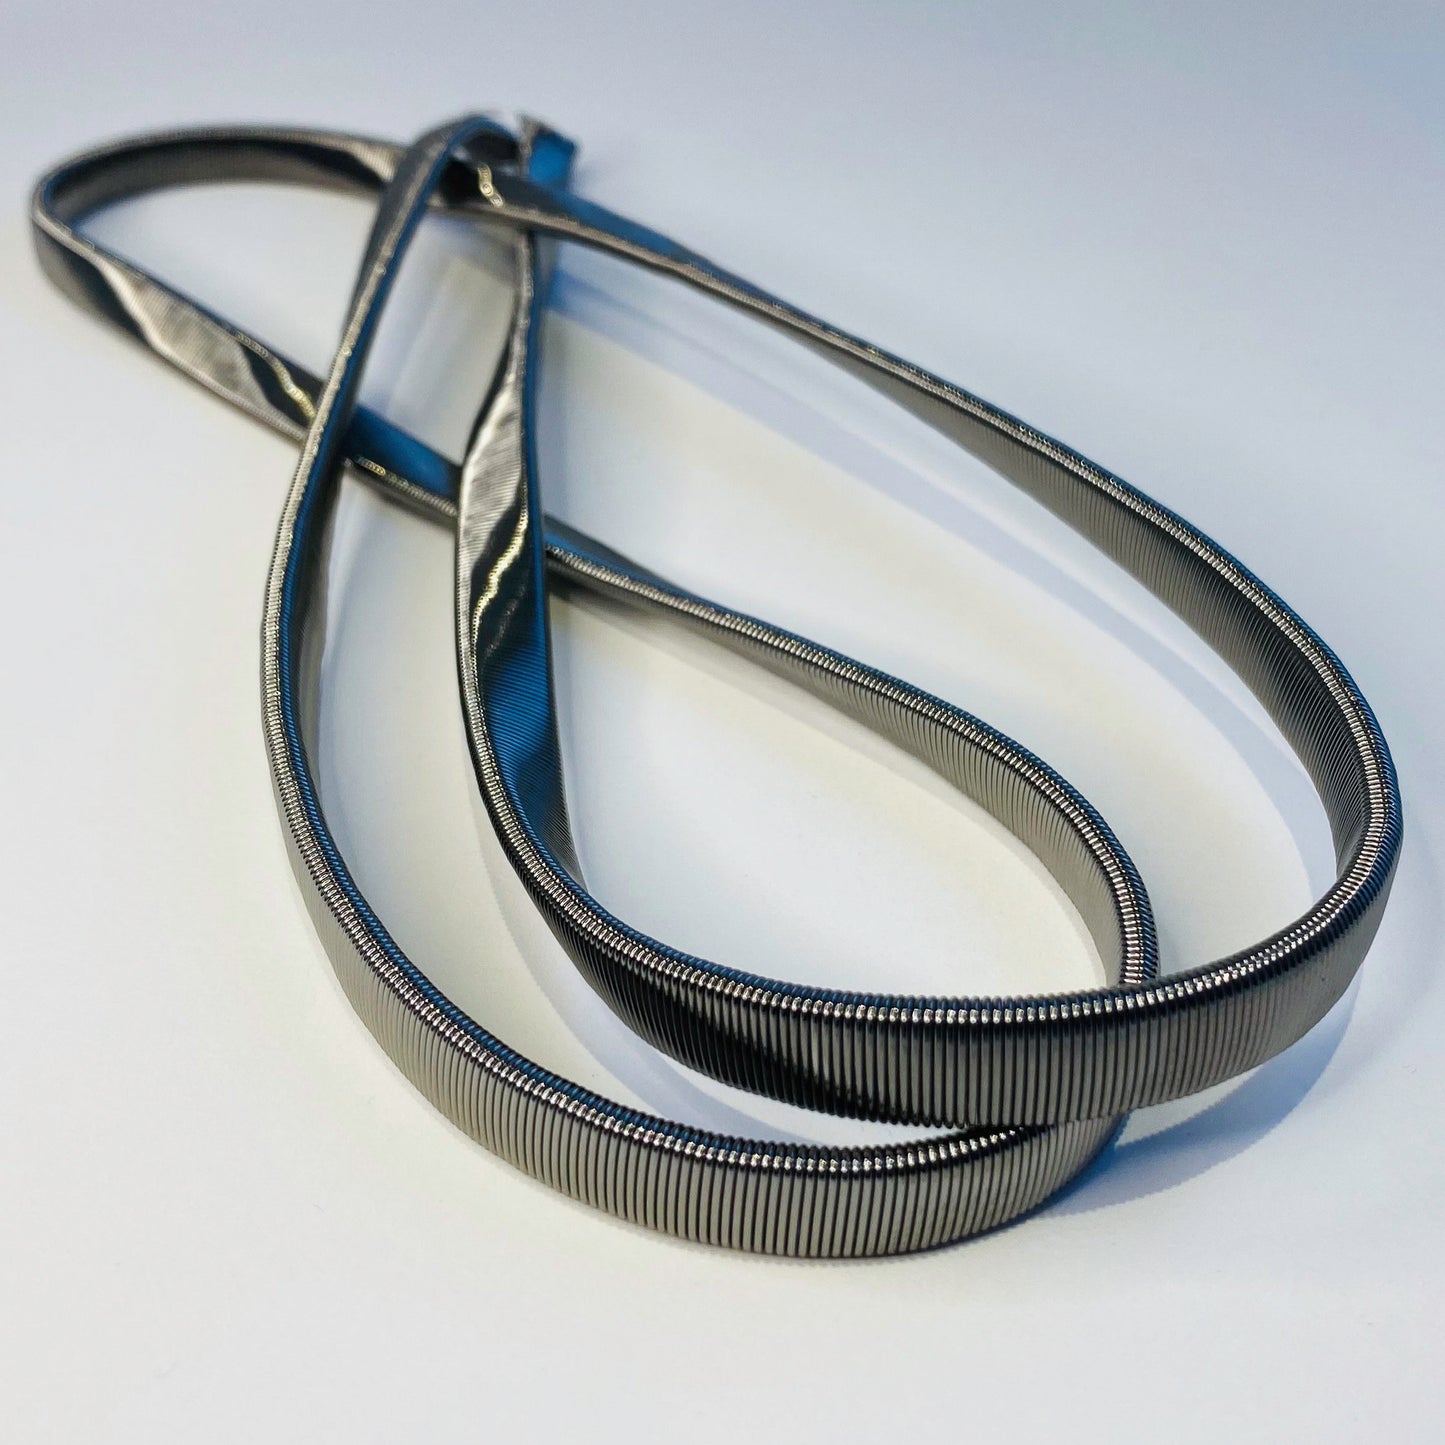 9mm Wide Stretch Metal Bands for Belts or Straps